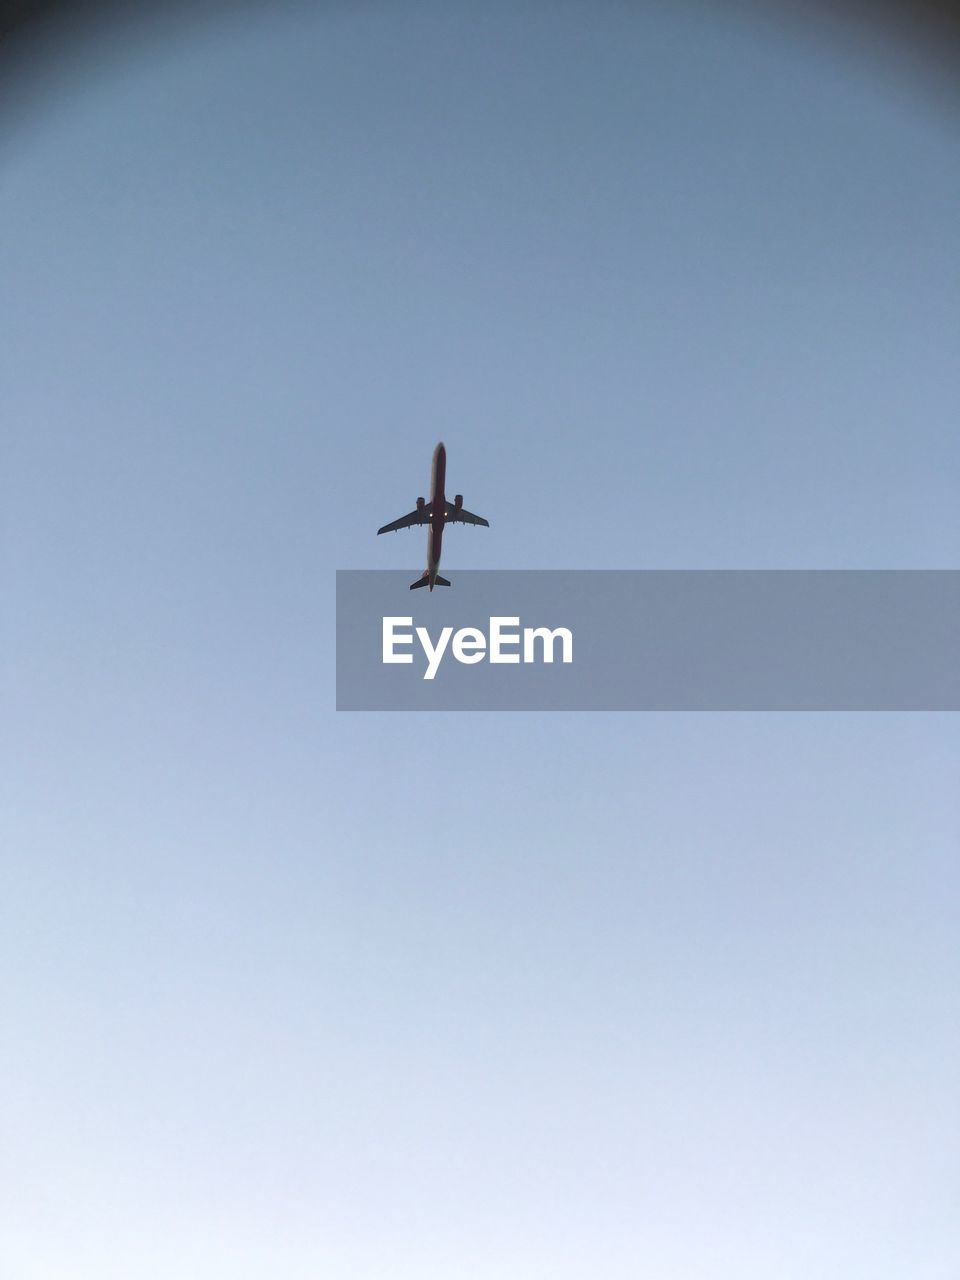 LOW ANGLE VIEW OF AIRPLANE FLYING IN CLEAR SKY